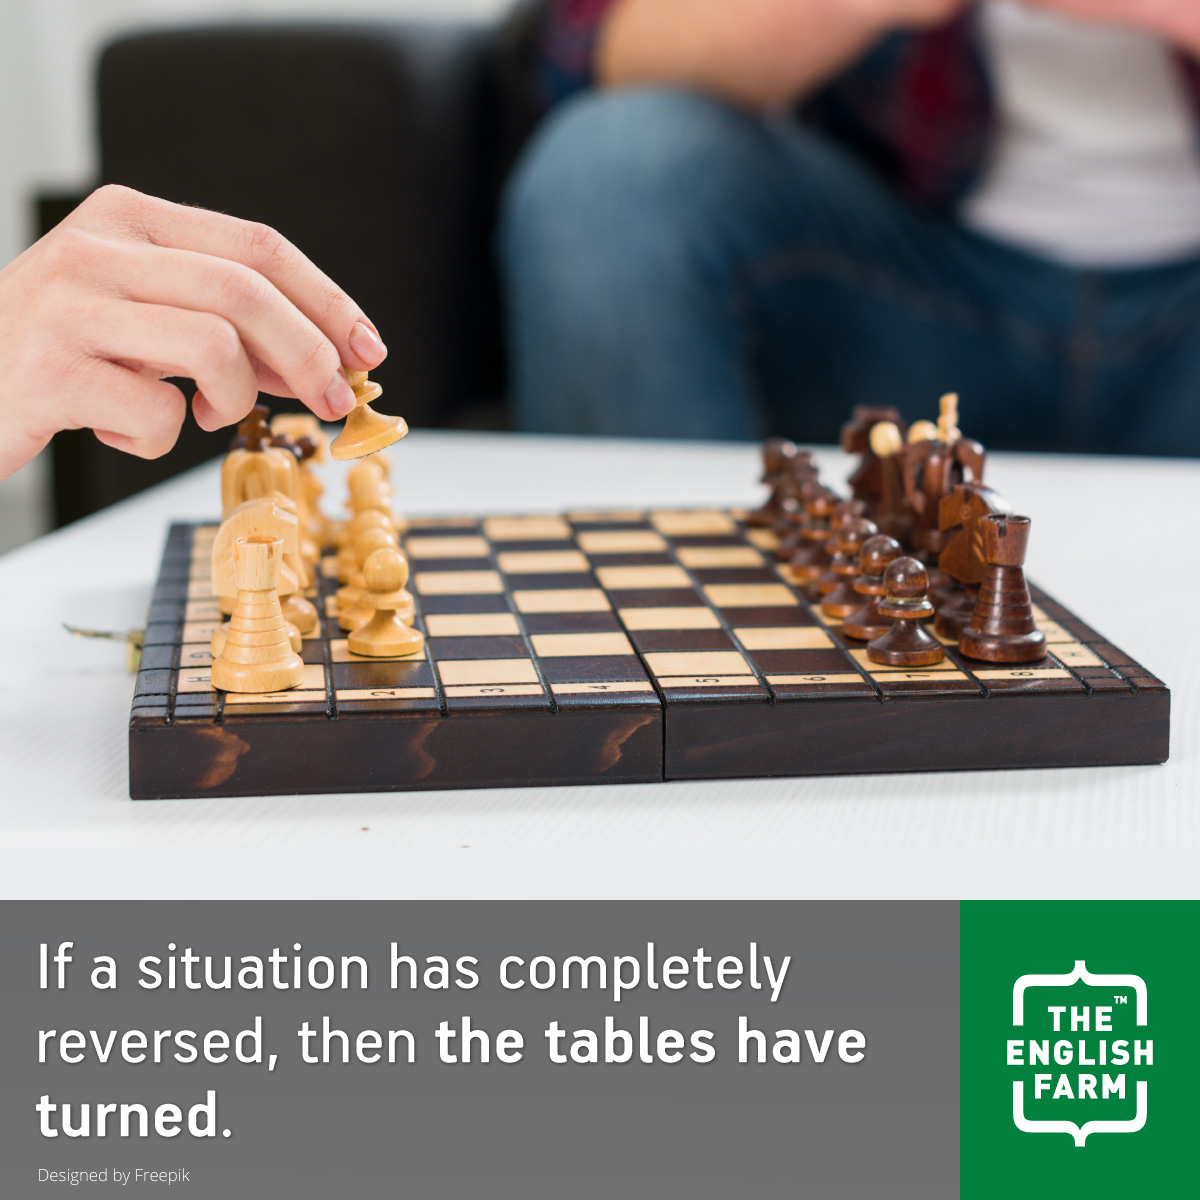 During a chess match, the tables can turn.